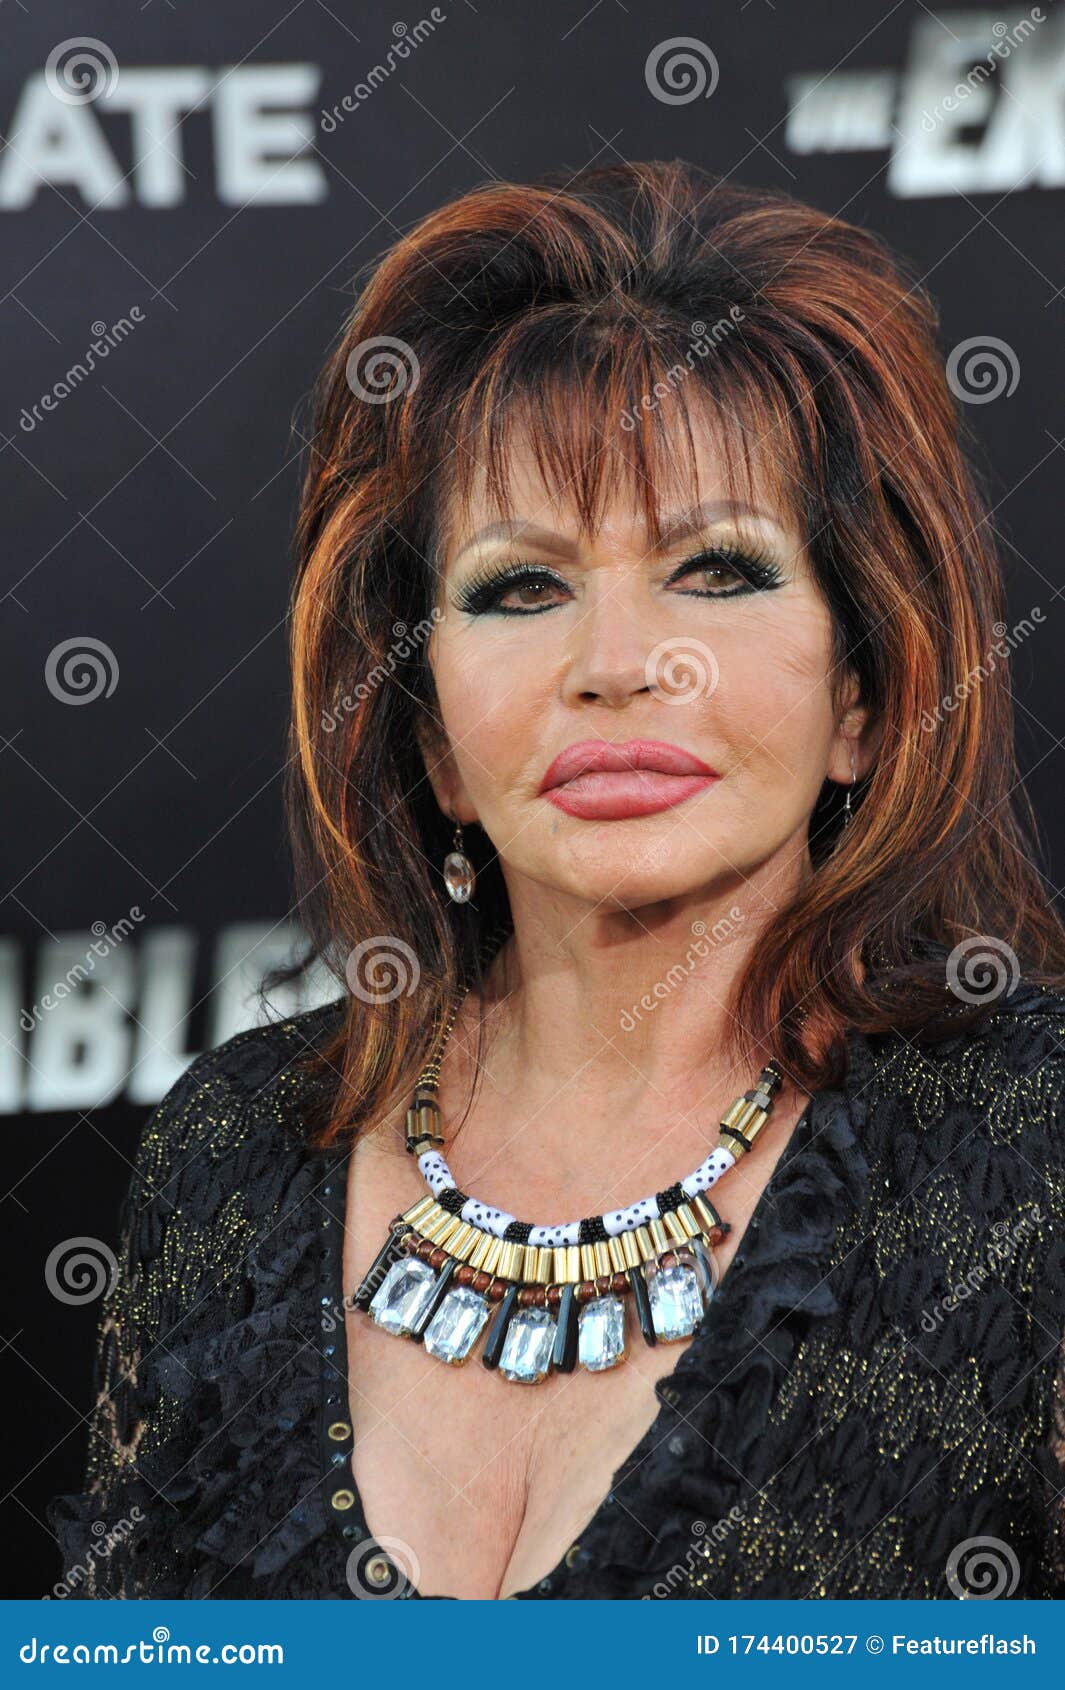 jackie stallone and sylvester stallone